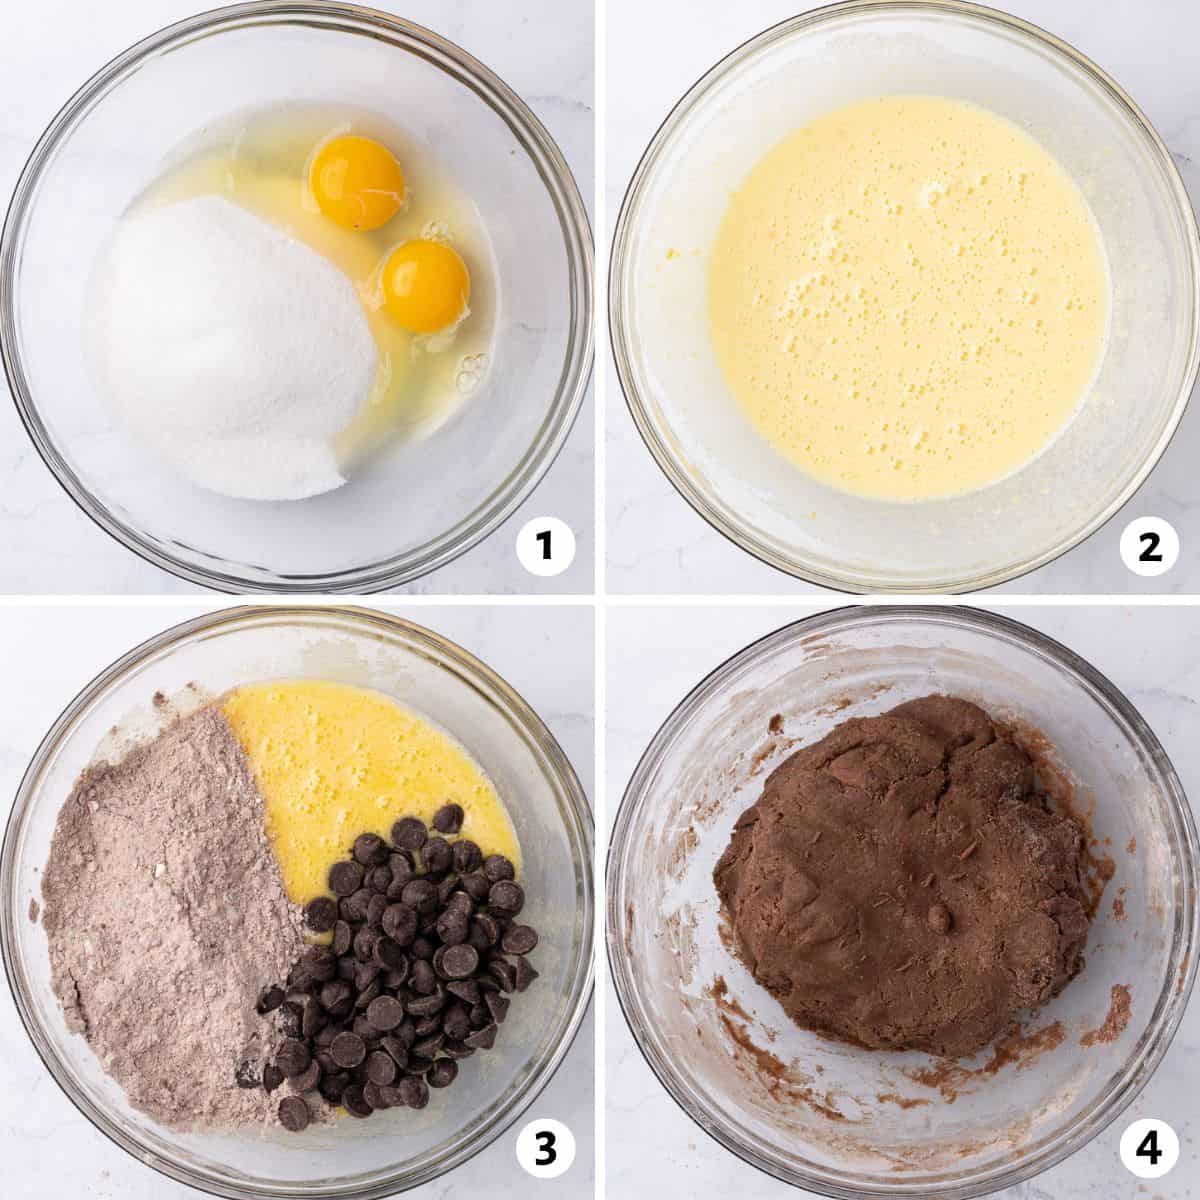 4 image collage making recipe: 1-eggs and sugar in a bowl, 2- after combining, 3- dry ingredients and chocolate chips added, and 4- dough after mixing.